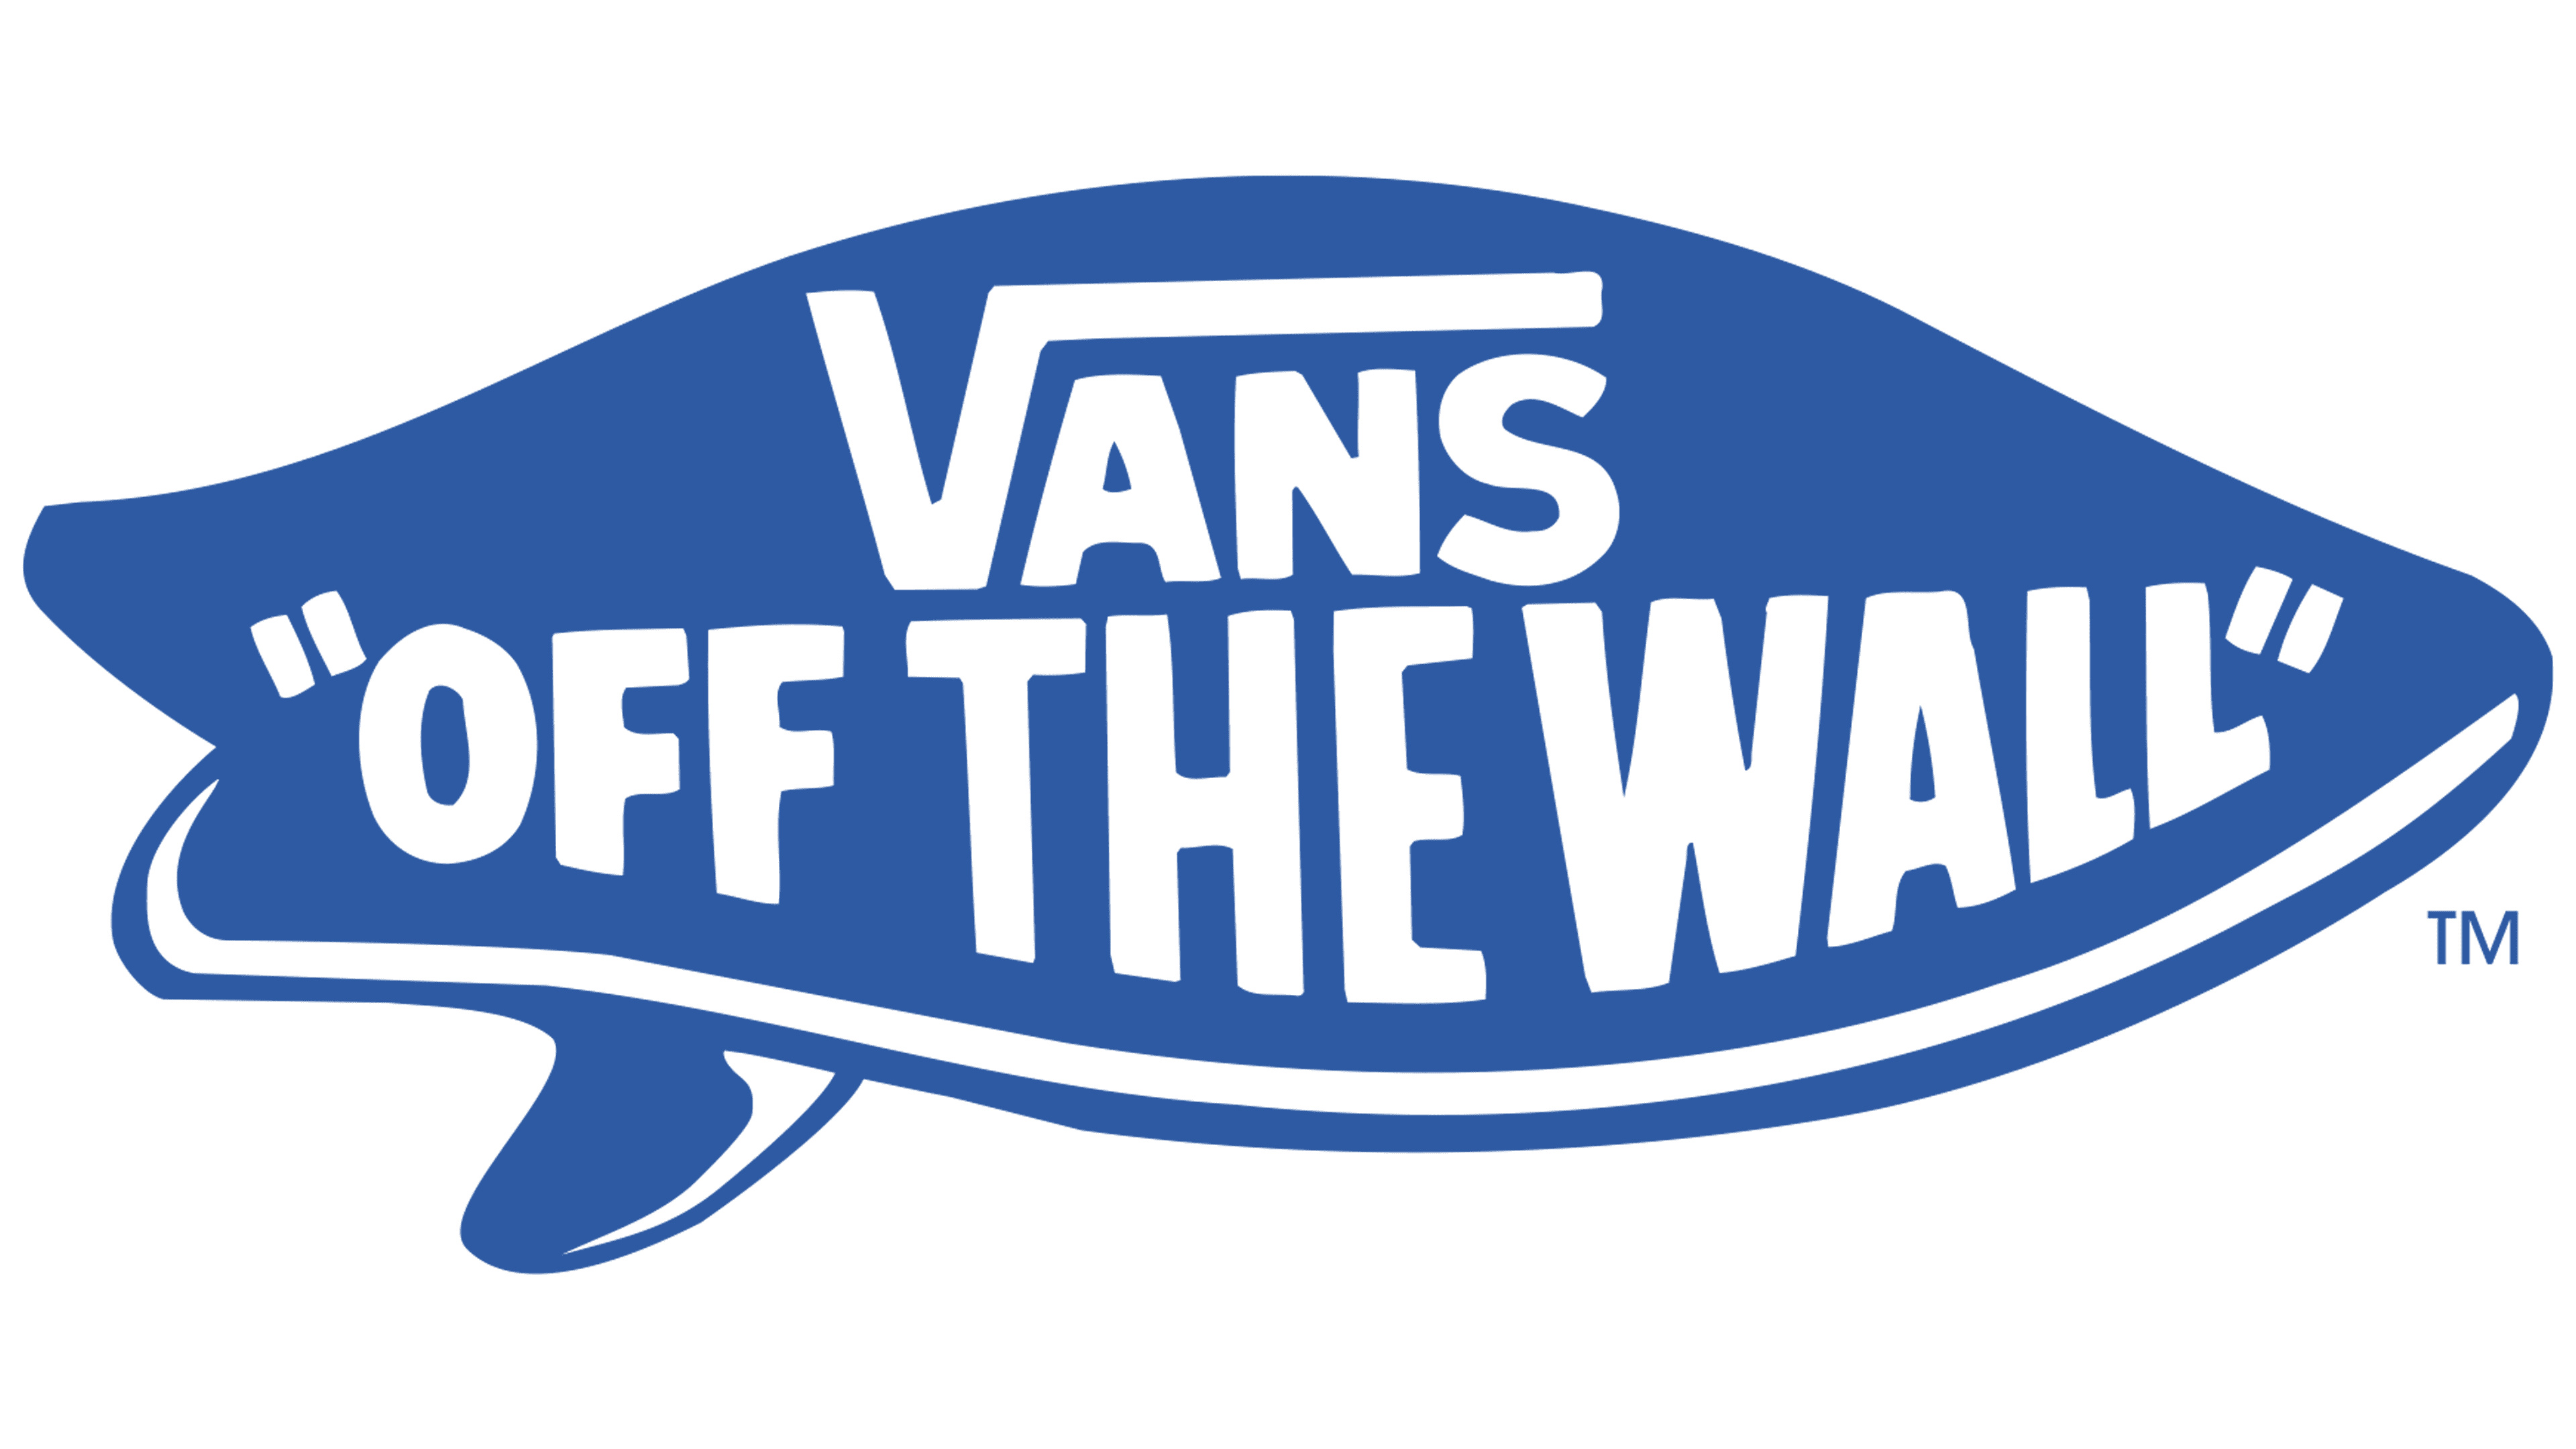 Vans: The brand promoting creative self-expression and individuality for over 50 years, Youth culture. 3840x2160 4K Wallpaper.